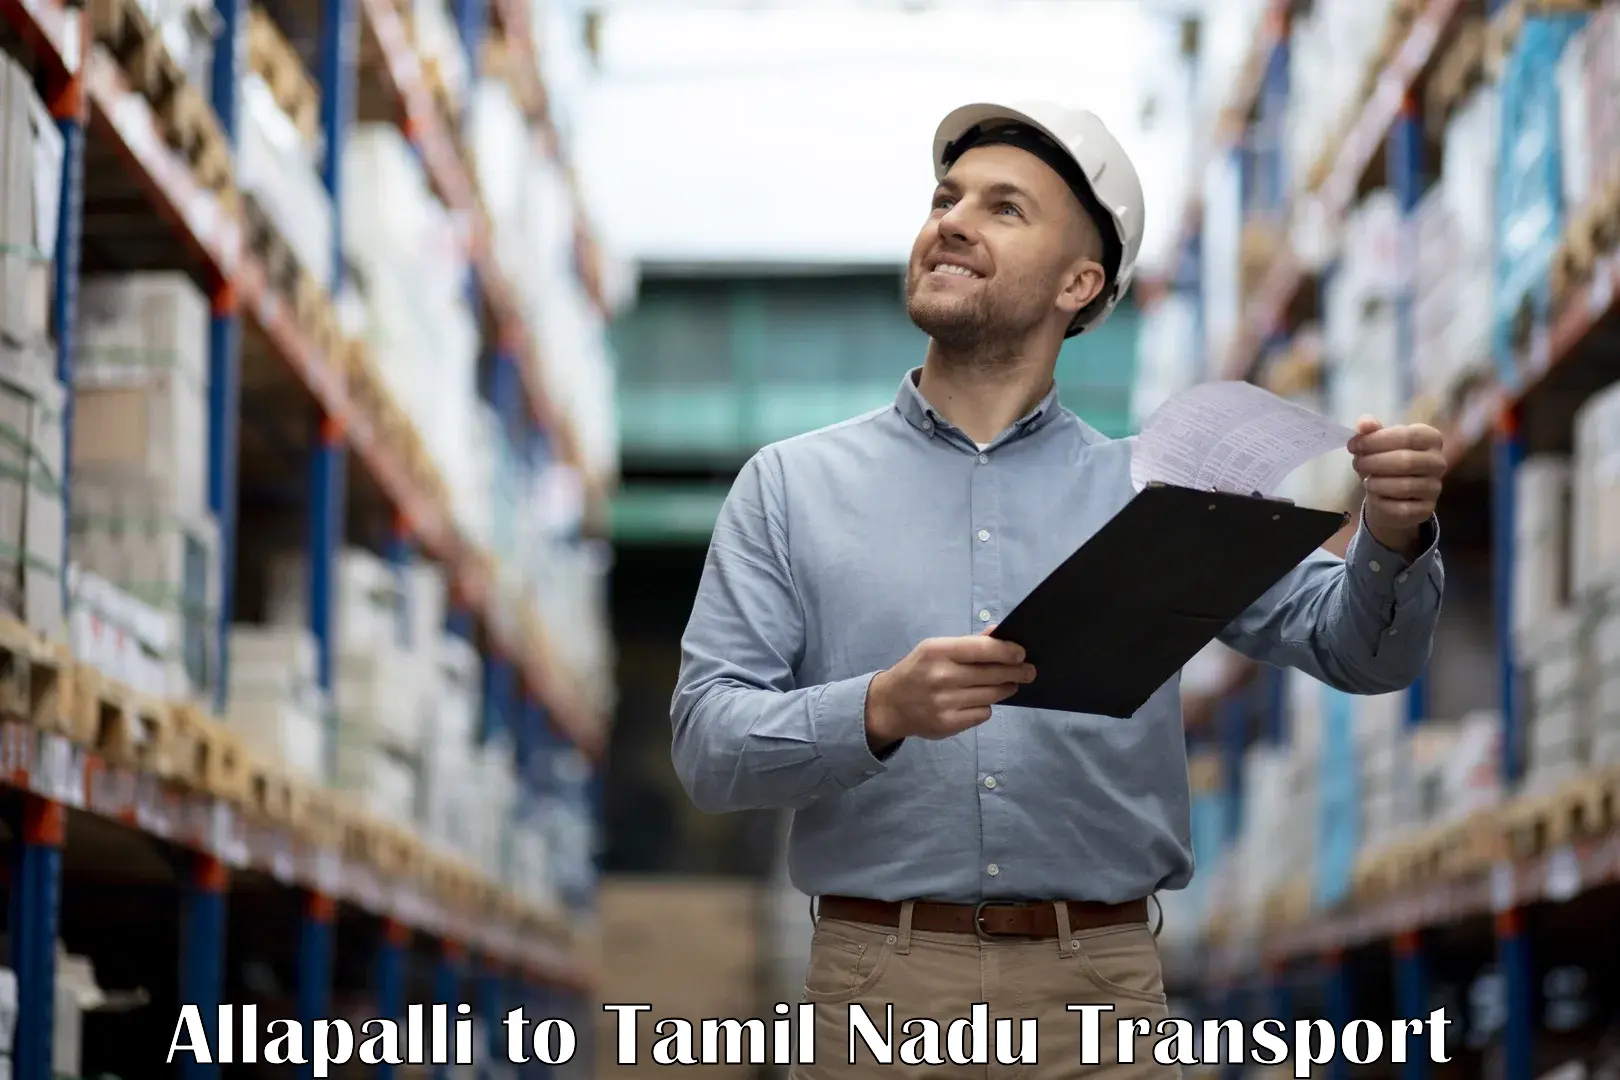 Parcel transport services Allapalli to Ennore Port Chennai